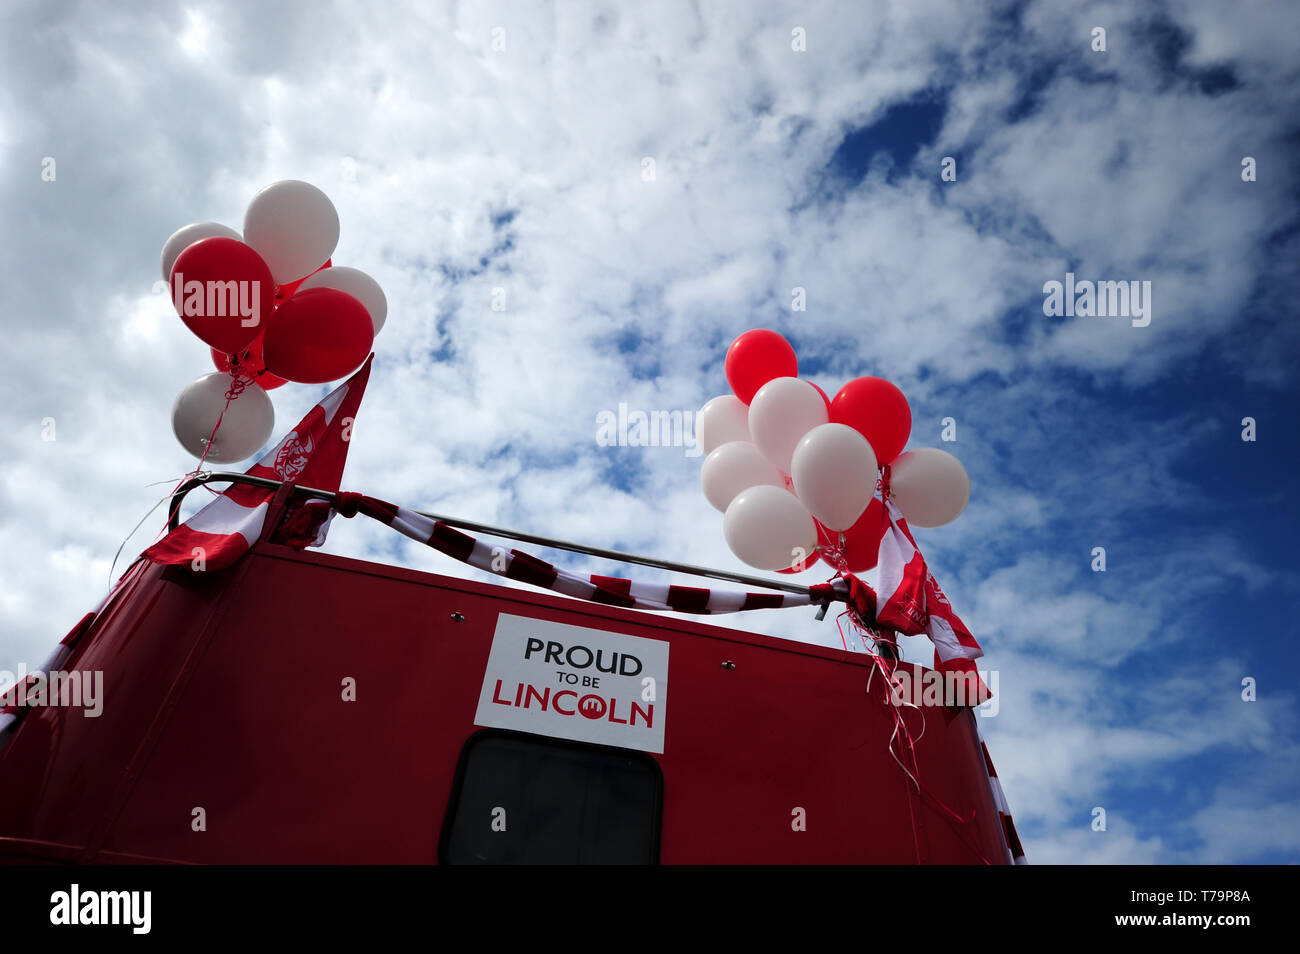 The player's bus before the victory parade through Lincoln City centre. Stock Photo